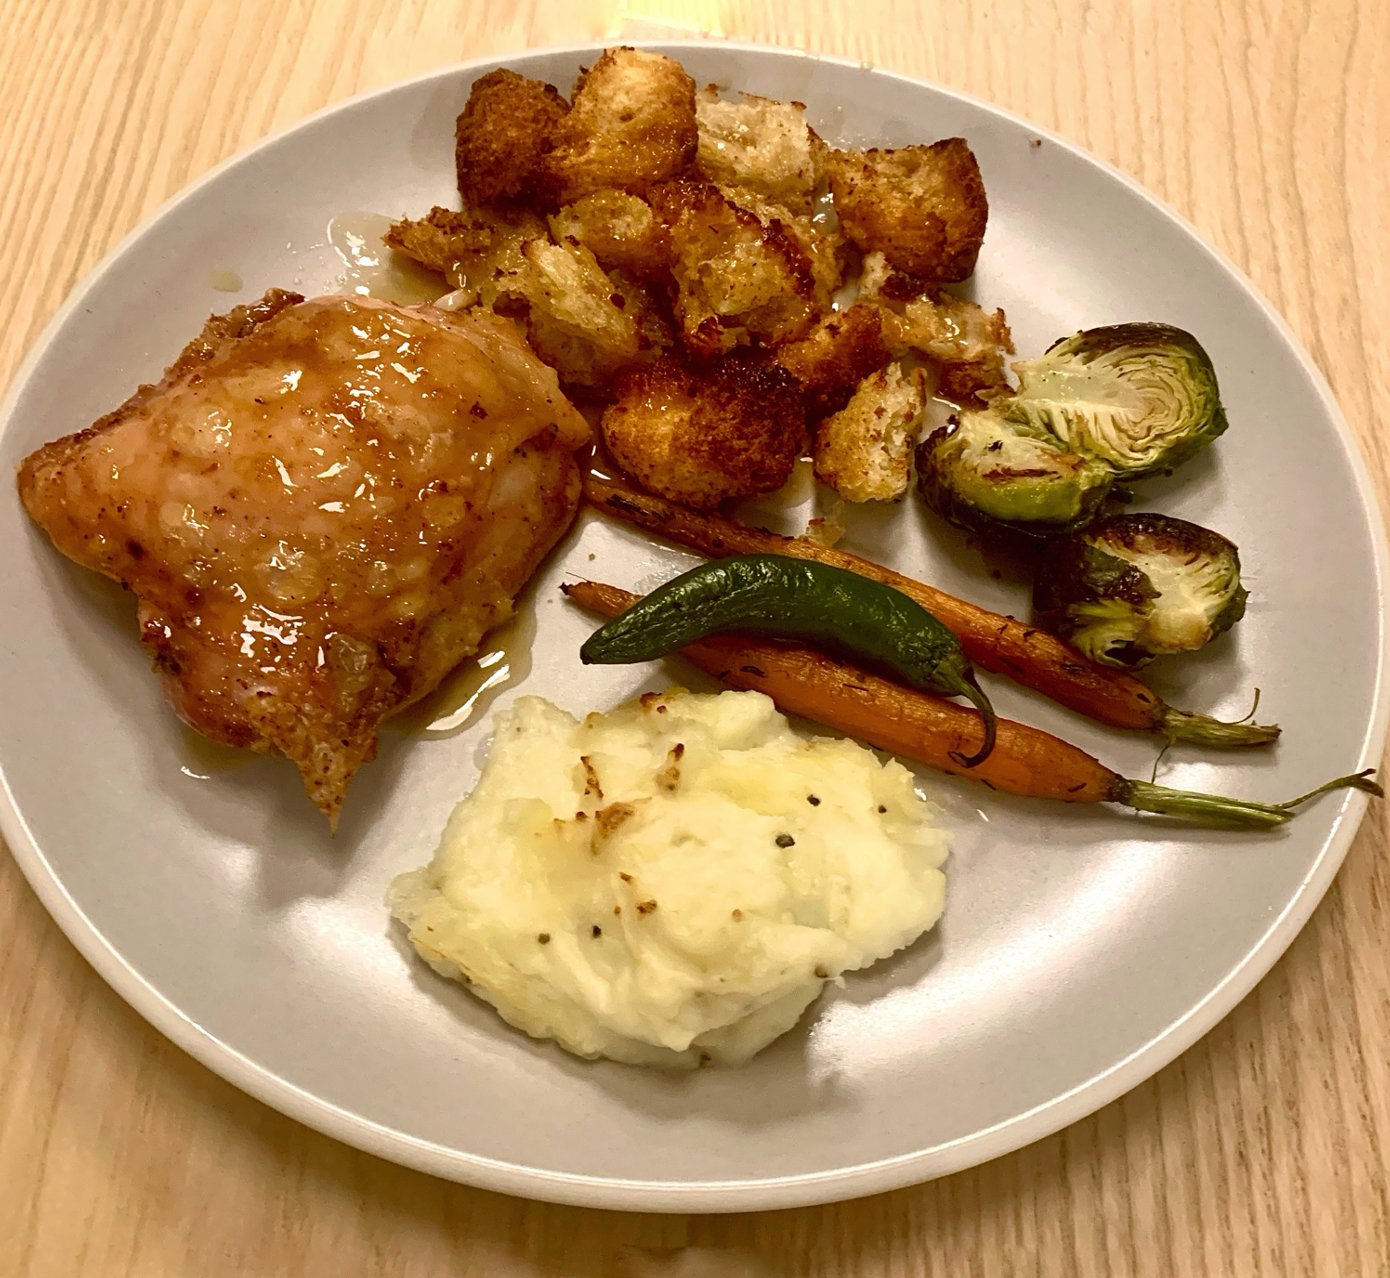 Roasted chicken with fish sauce and crunchy croutons, make-ahead mashed potatoes and grilled vegetables.